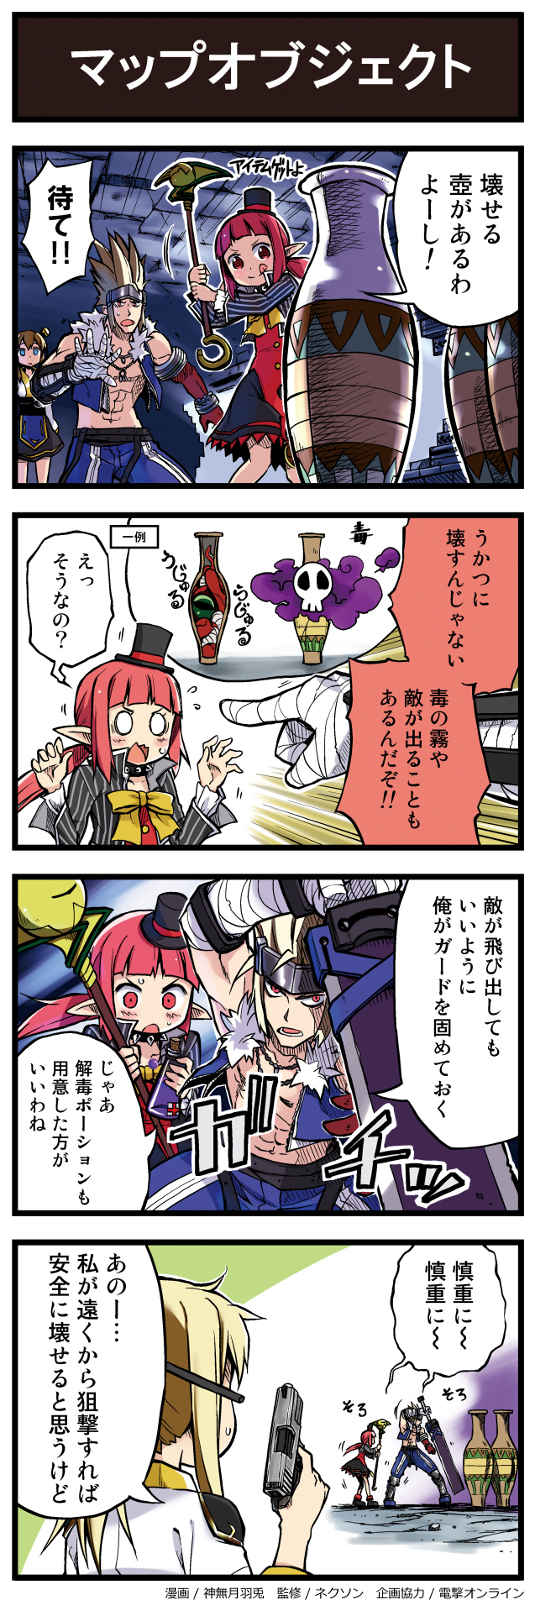 4koma bococho check_translation comic dungeon_and_fighter female_gunner_(dungeon_and_fighter) gameplay_mechanics highres kannazuki_hato mage_(dungeon_and_fighter) octopus official_art poison priest_(dungeon_and_fighter) slayer_(dungeon_and_fighter) tagme translation_request